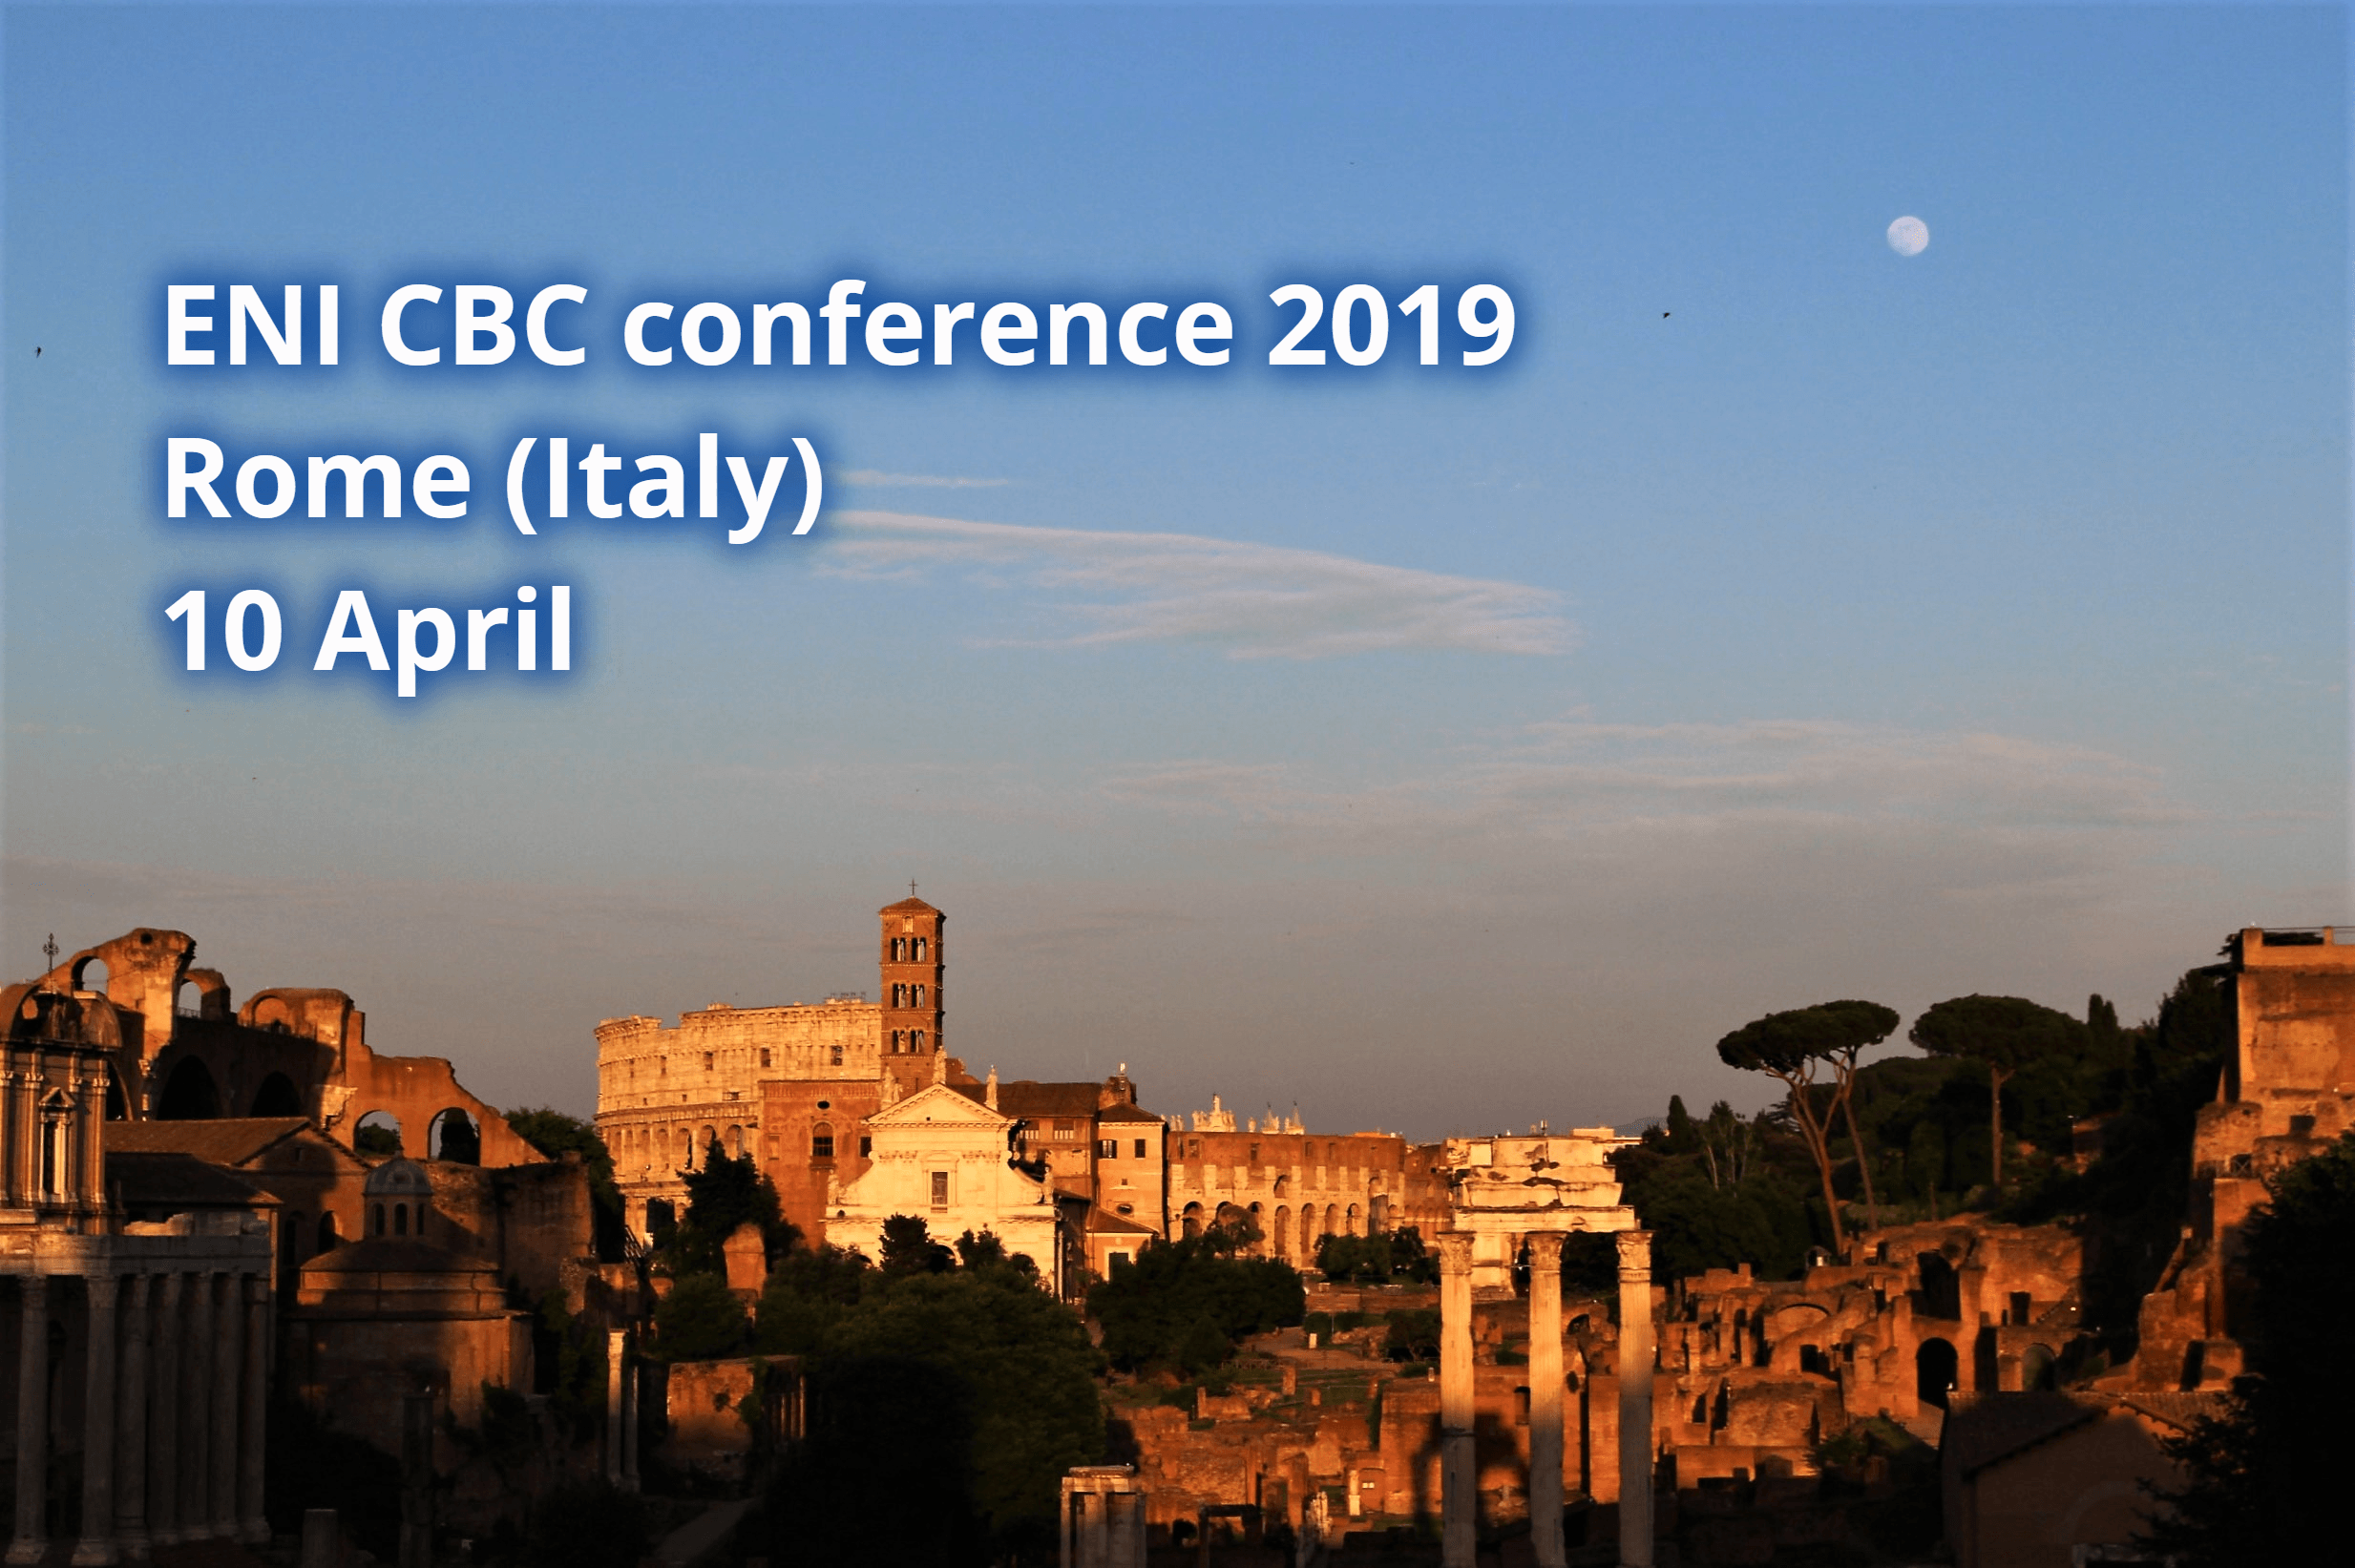 ENI CBC annual conference 2019 - Present and future of cross-border cooperation along the EU's external borders